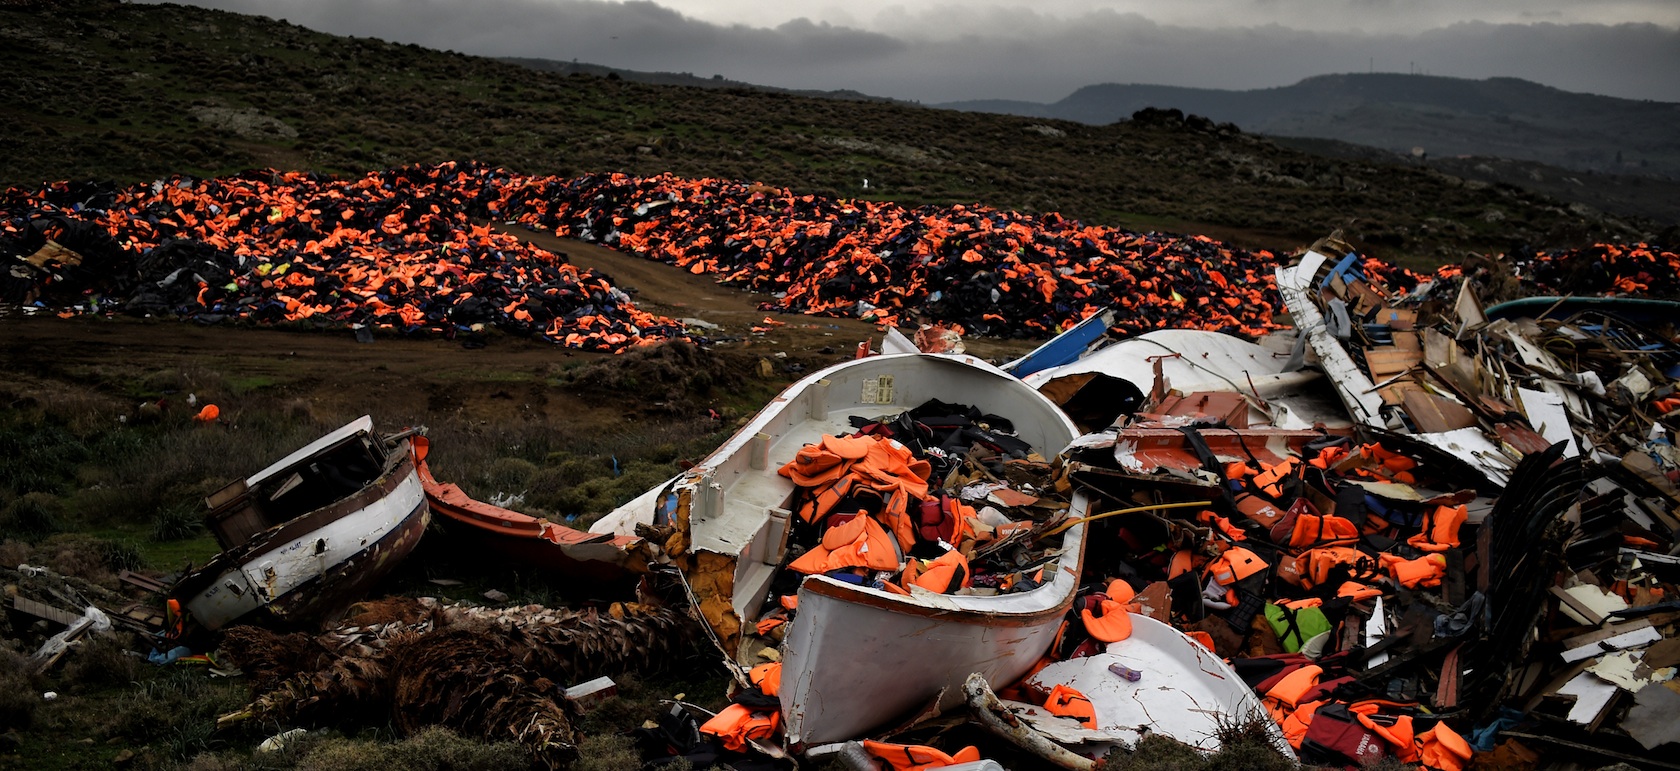 Wrecked boats and thousands of life jackets used by refugees and migrants during their journey across the Aegean sea lie in a dump in Mithimna on February 19, 2016. The EU and Turkey will hold a special summit in early March to push forward a deal to stem the migration crisis, European Council President Donald Tusk said. / AFP / ARIS MESSINIS